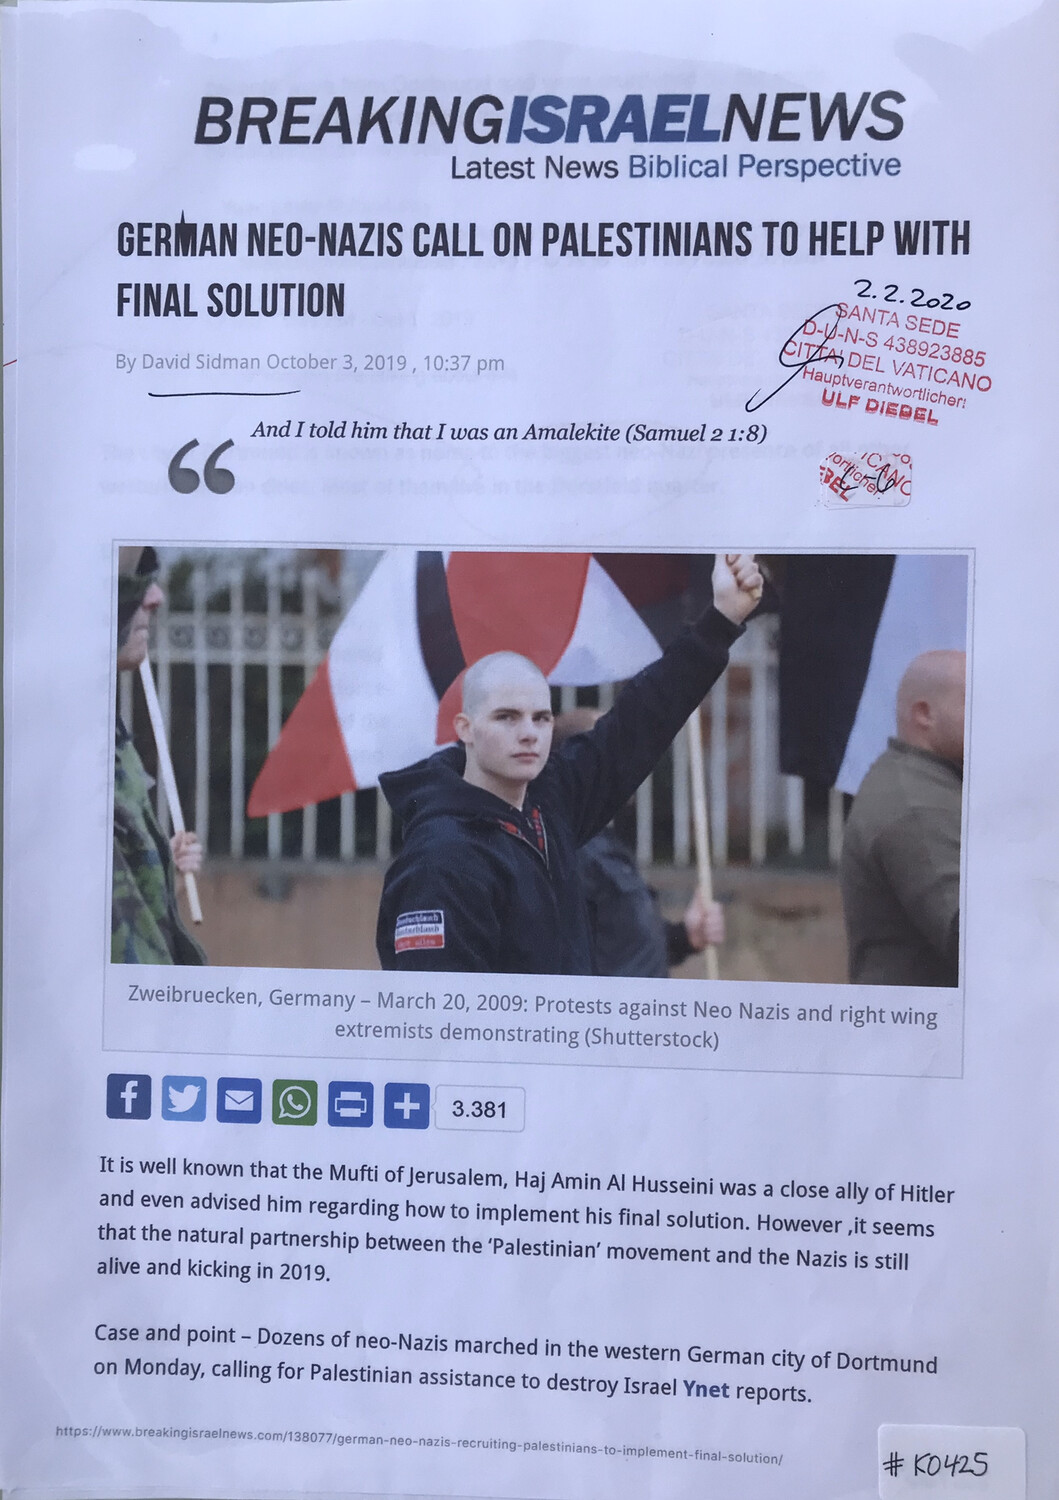 #K0425 l Breaking Israel News - German Neo-Nazis call on Palestinians to help with final solution by David Sidman